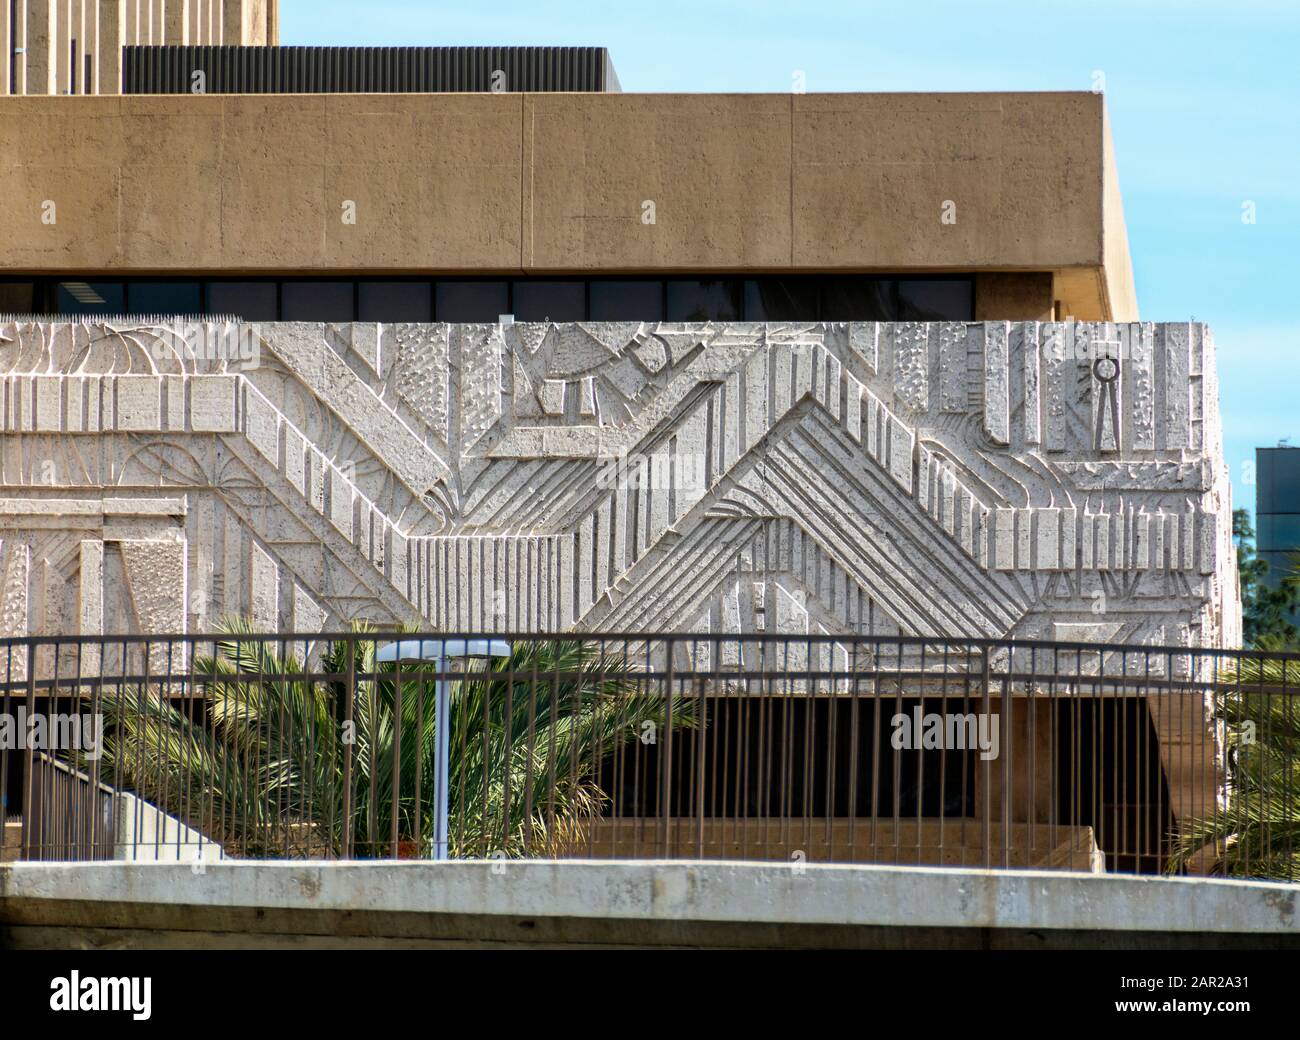 Closeup of carved stone border that decorates Santa Ana's New City Hall, a monolith of concrete built in the modern International style in the 1970's. Stock Photo